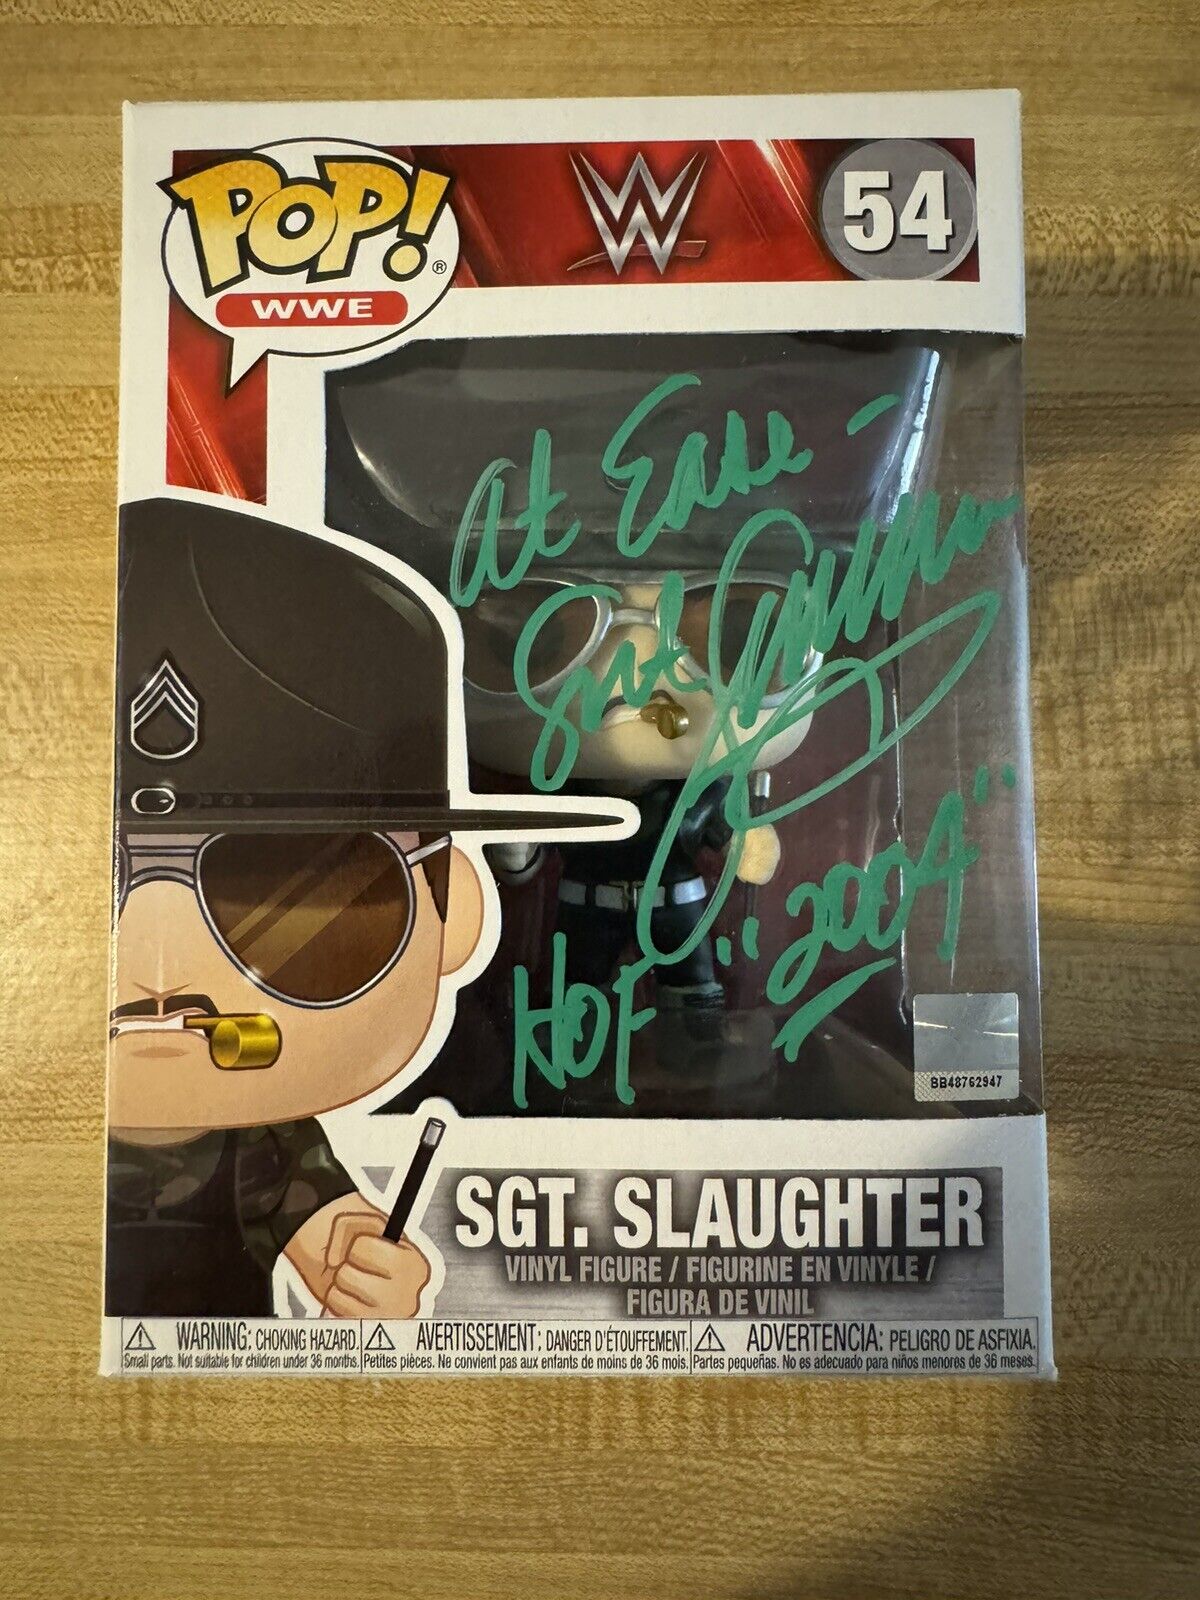 SGT. SLAUGHTER WWE 54 AUTOGRAPHED FUNKO POP